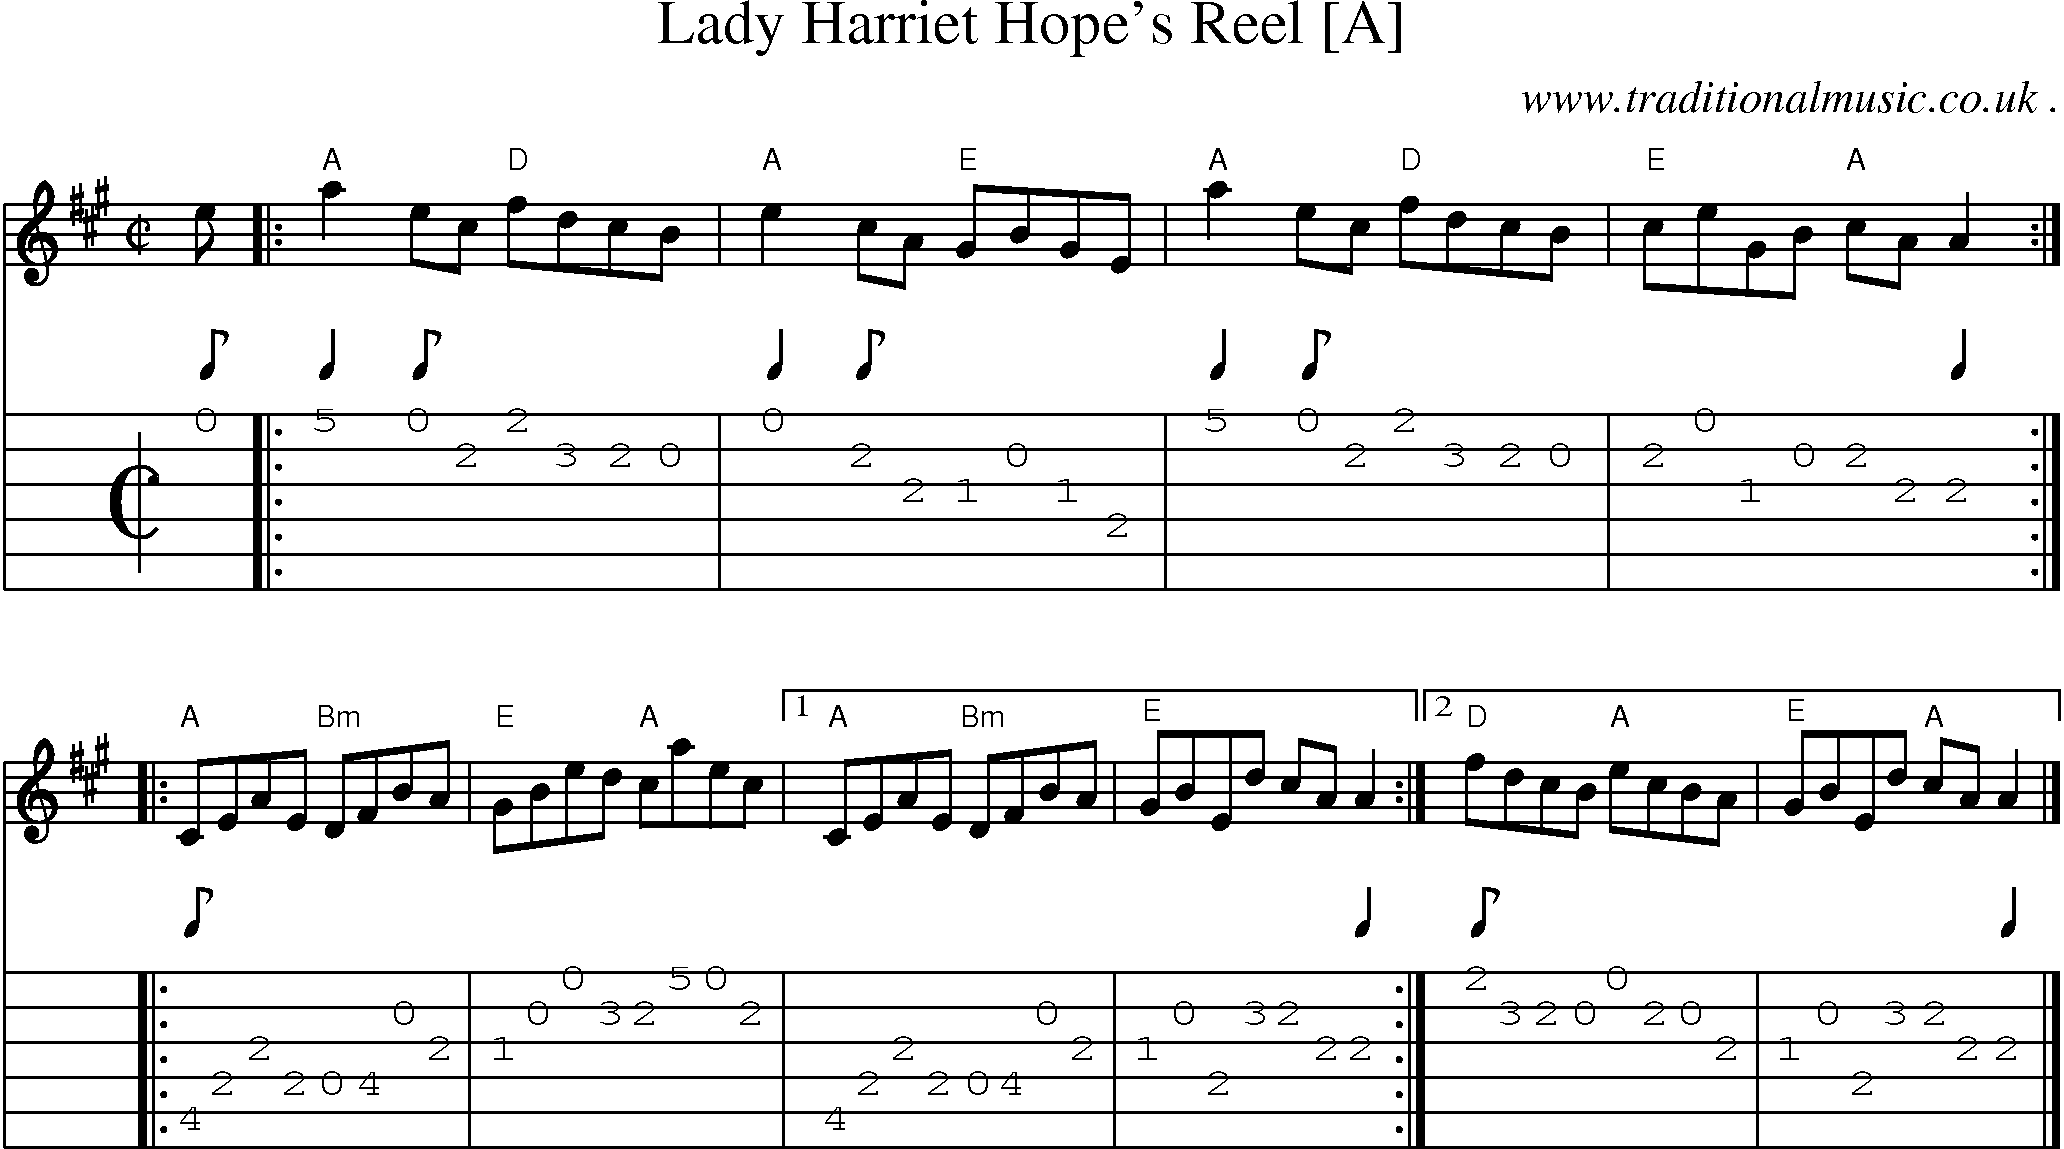 Sheet-music  score, Chords and Guitar Tabs for Lady Harriet Hopes Reel [a]